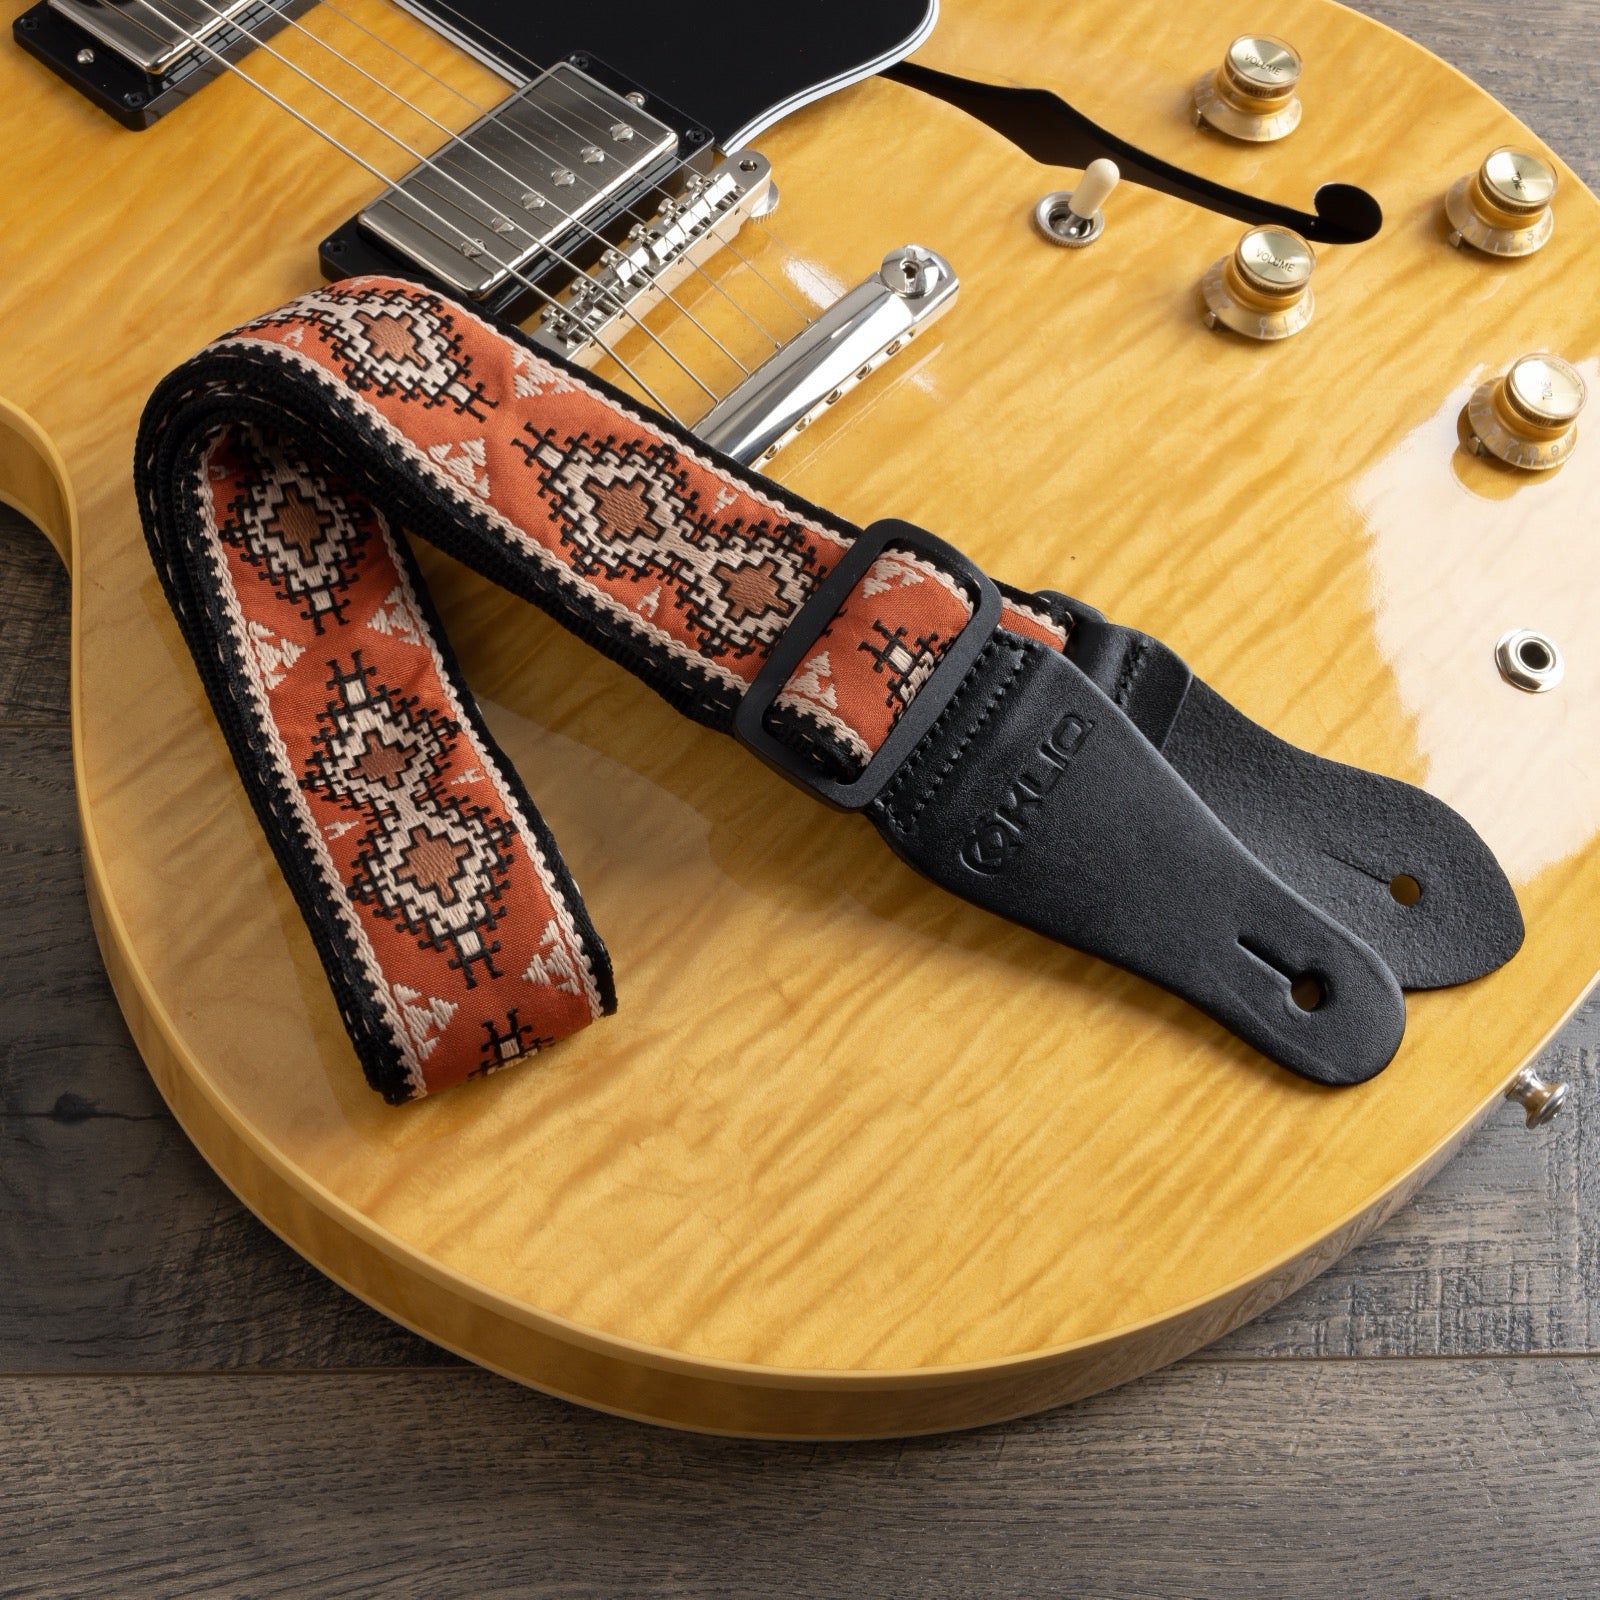 KLIQ Vintage Woven Guitar Strap for Acoustic and Electric Guitars + 2 Free Rubber Strap Locks, 2 Free Guitar Picks and 1 Free Lace | Terylene Printed